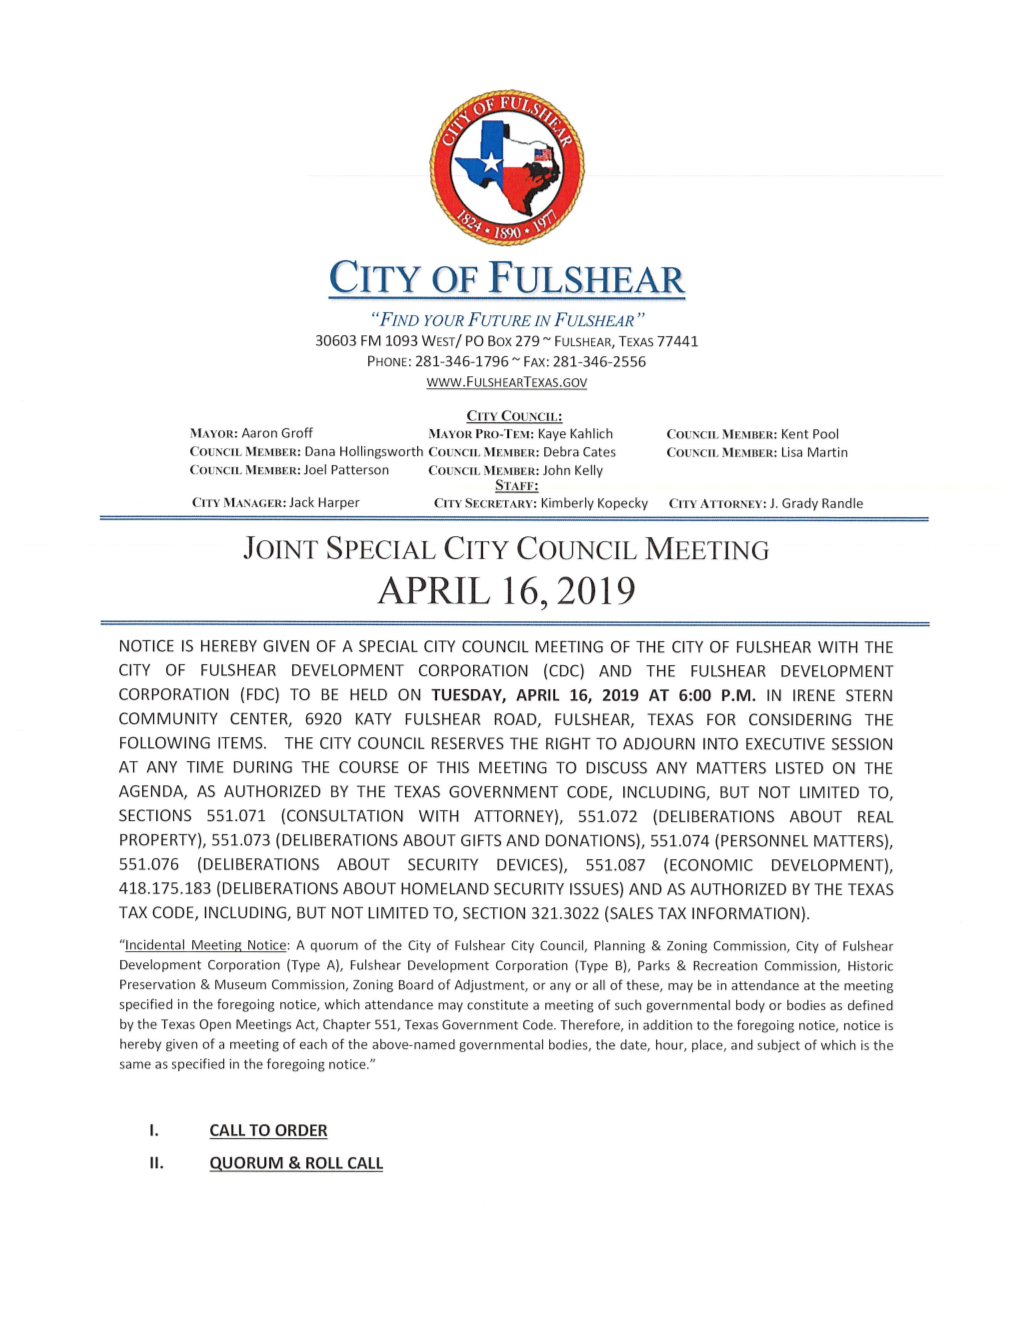 PACKET 4-16-19 (Special).Pdf